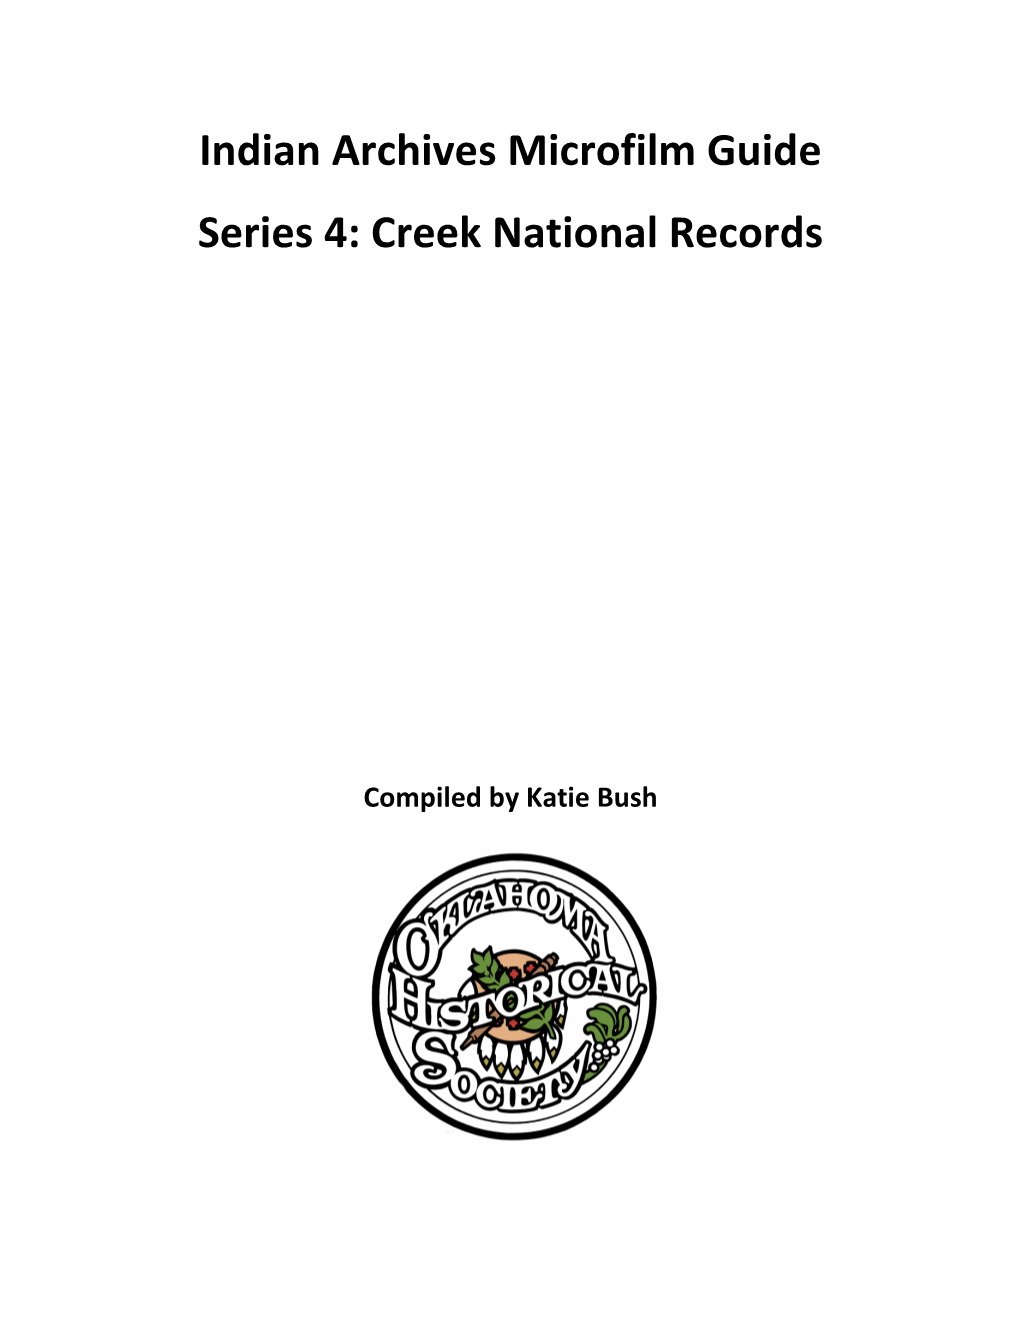 Creek National Records